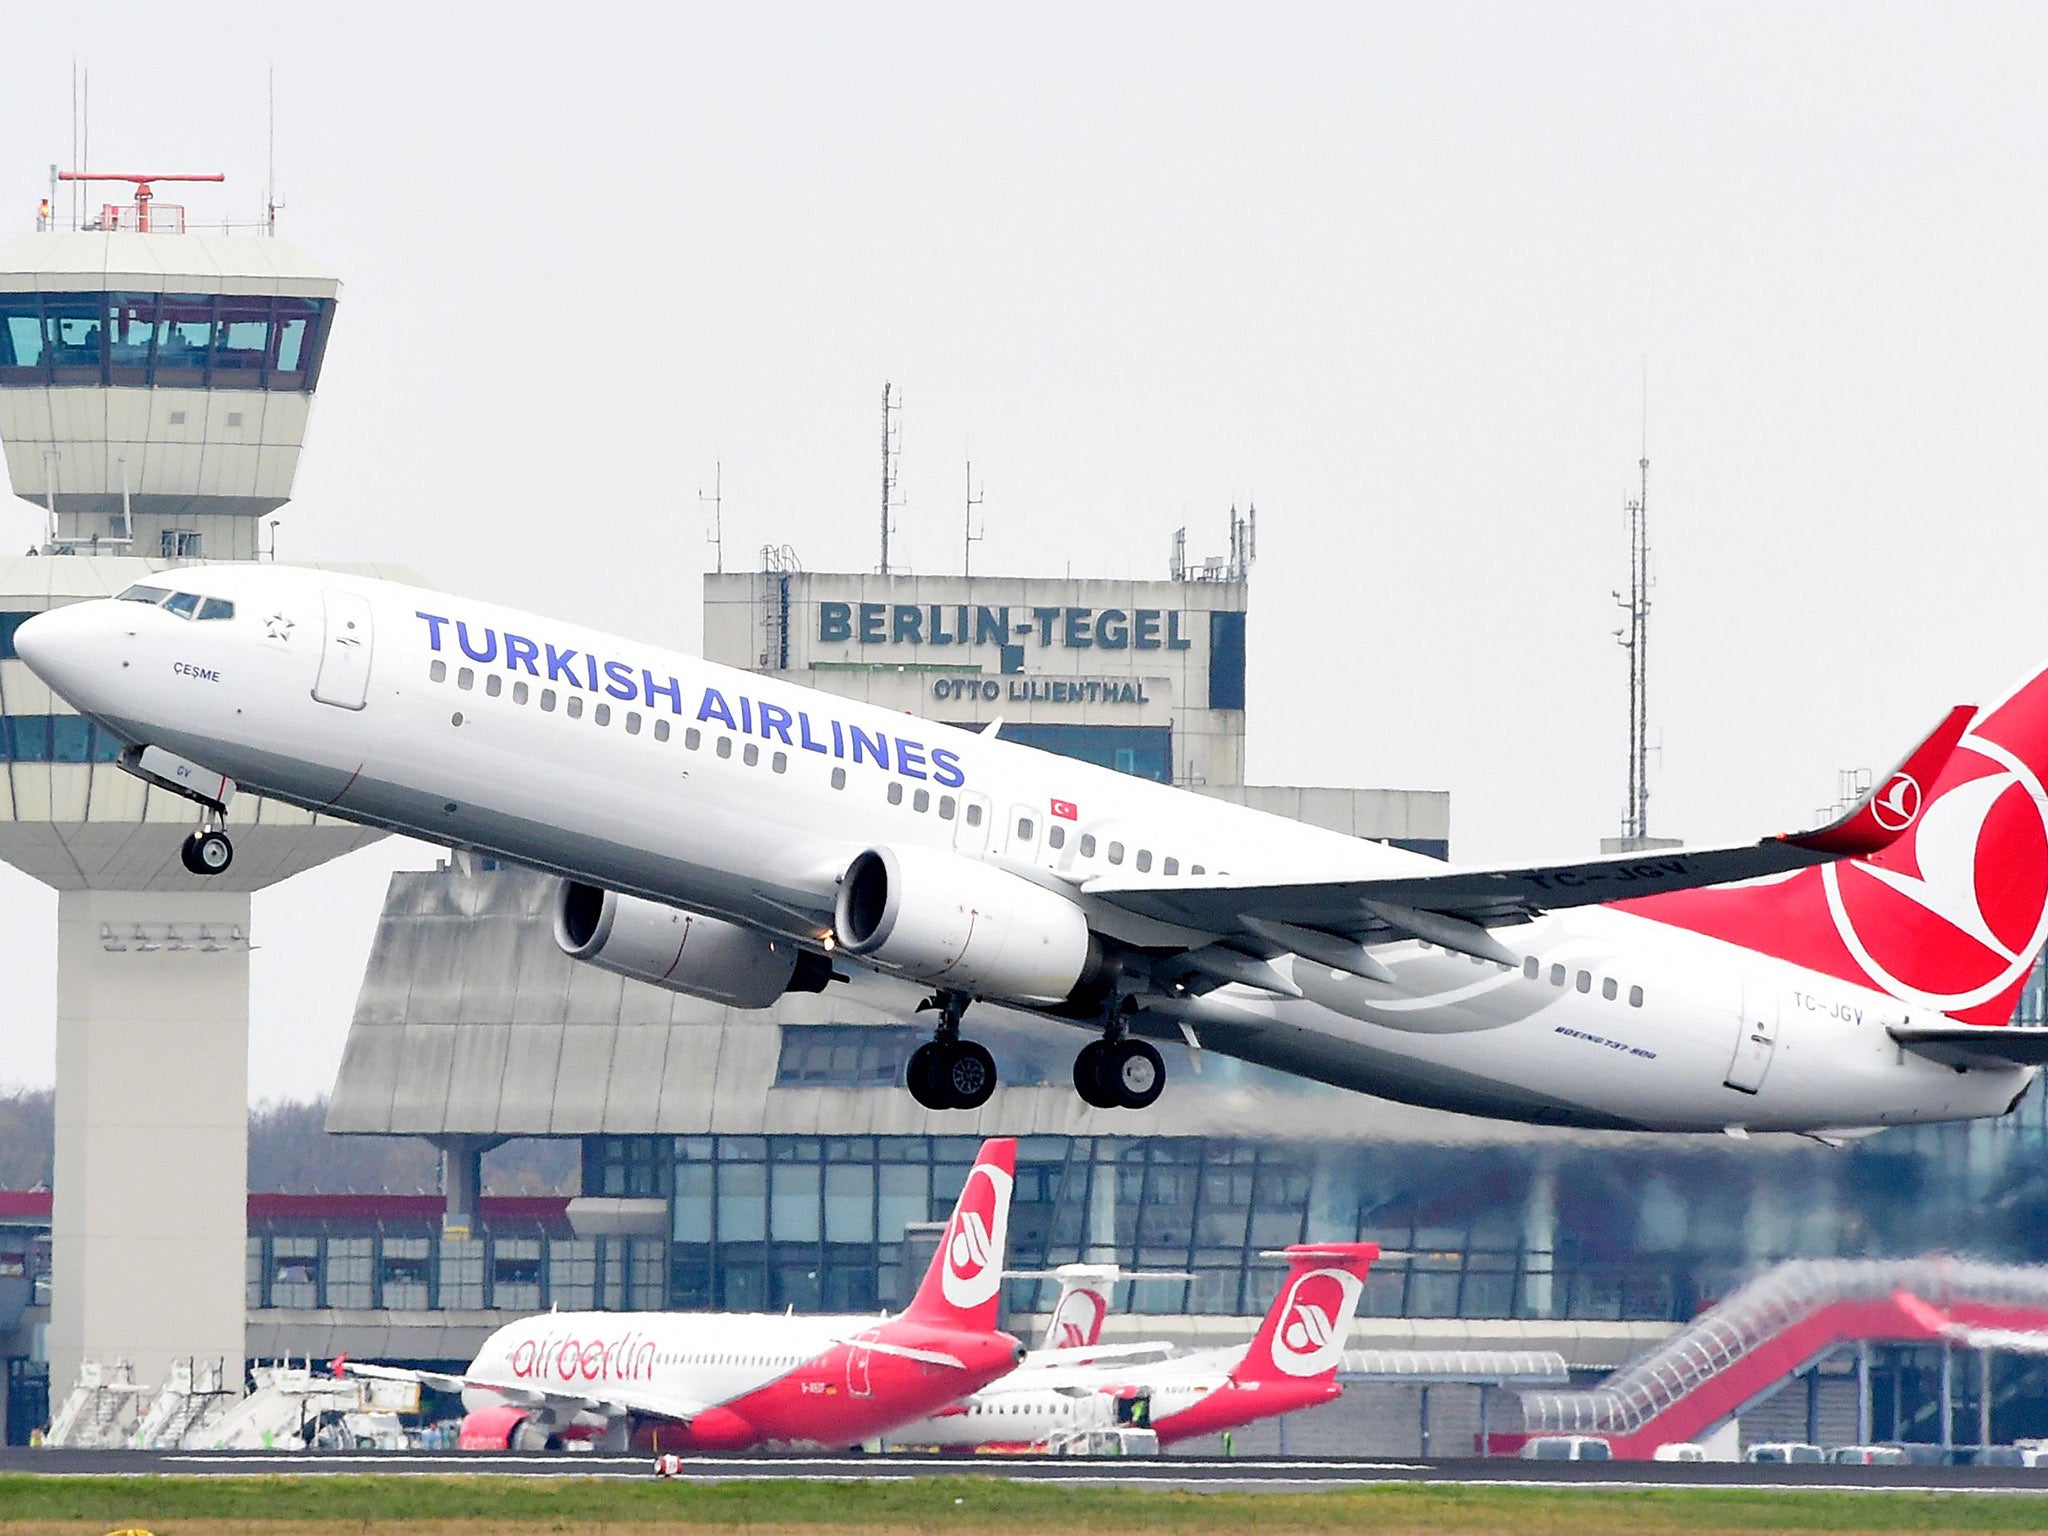 Turkish Airlines shares were up 2.83 per cent following the decision